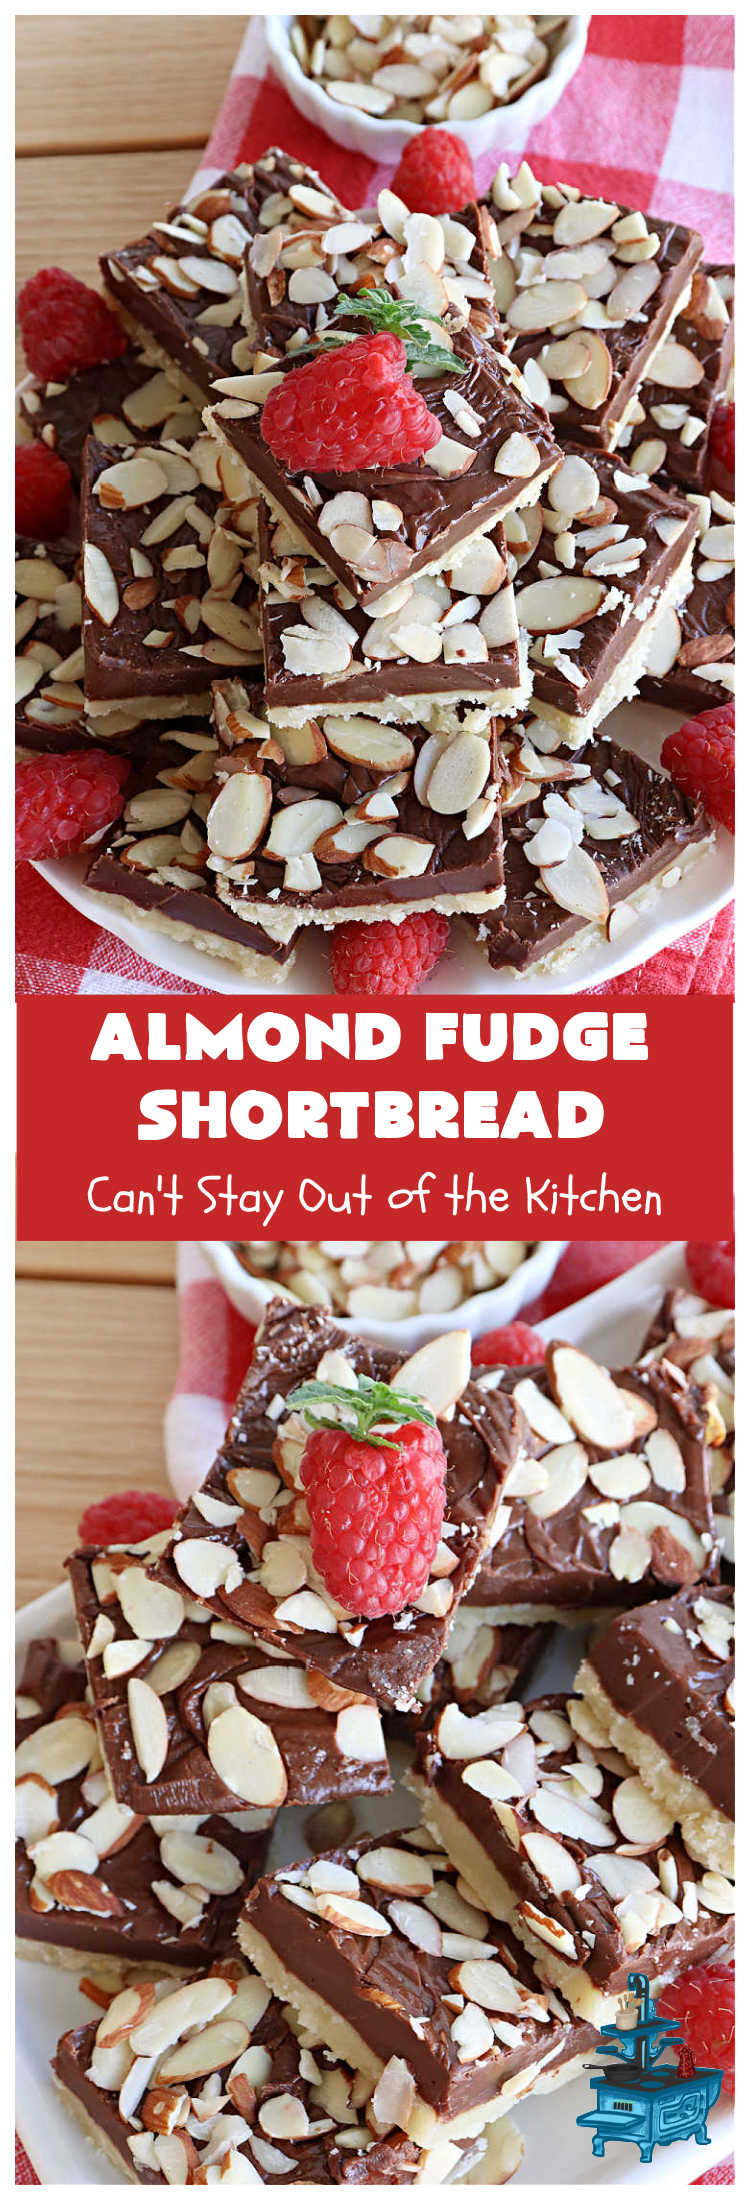 Almond Fudge Shortbread | Can't Stay Out of the Kitchen | This luscious, fudge, chocolaty #shortbread #recipe is rich, decadent & heavenly. Wow your family & friends with this fantastic #cookie at your next #potluck, #tailgating party, #BackyardBarbecue or even #holiday baking & a  #ChristmasCookieExchange. Every bite will have you swooning! #Almonds #Fudge #dessert #AlmondFudgeShortbread #ChocolateDessert